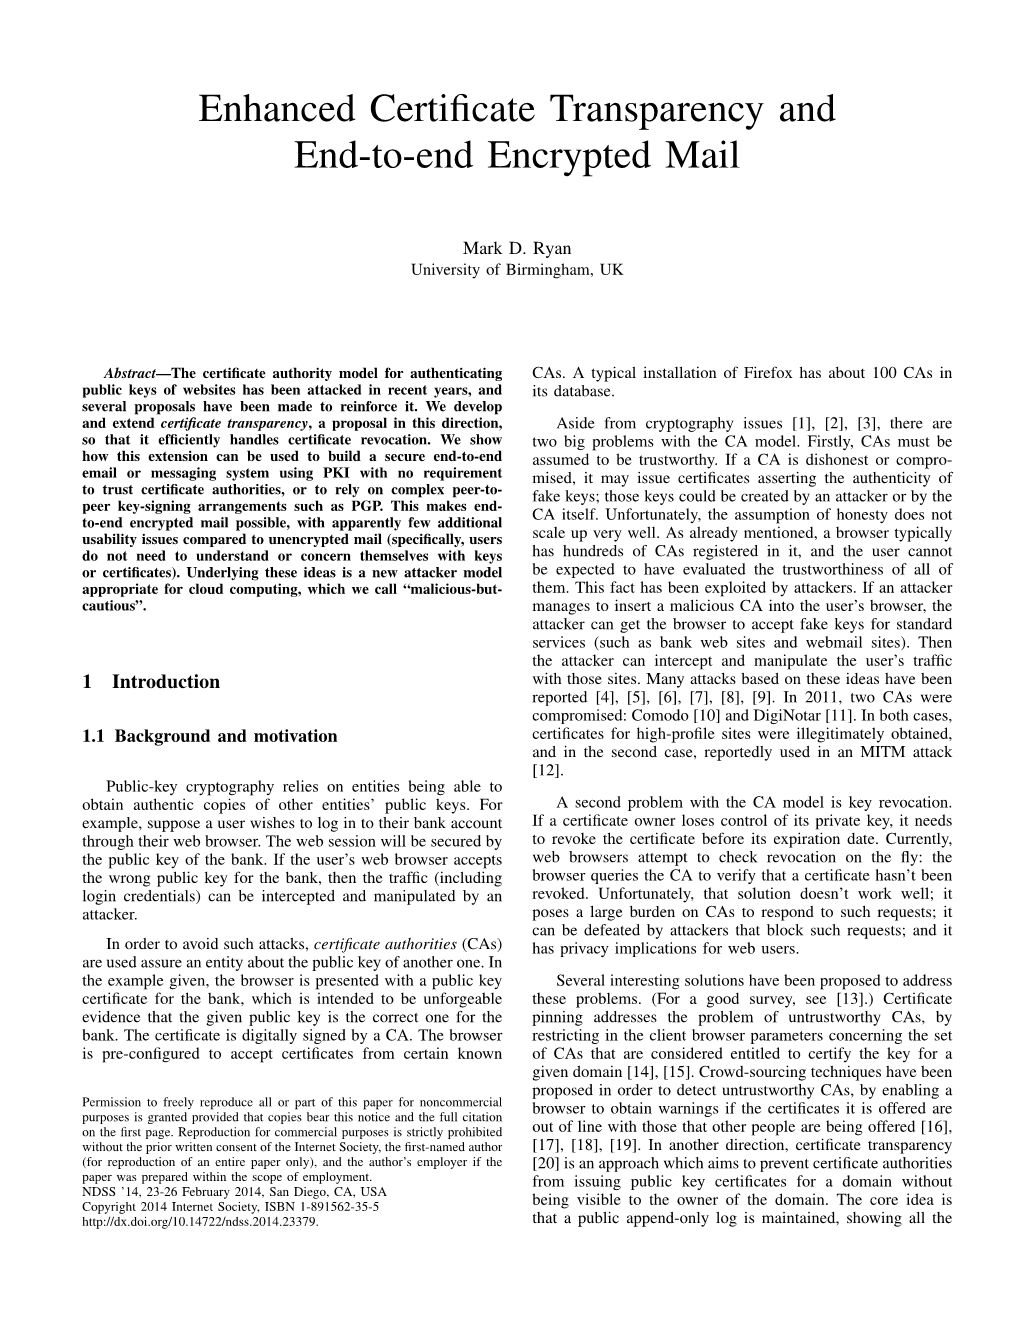 Enhanced Certificate Transparency and End-To-End Encrypted Mail